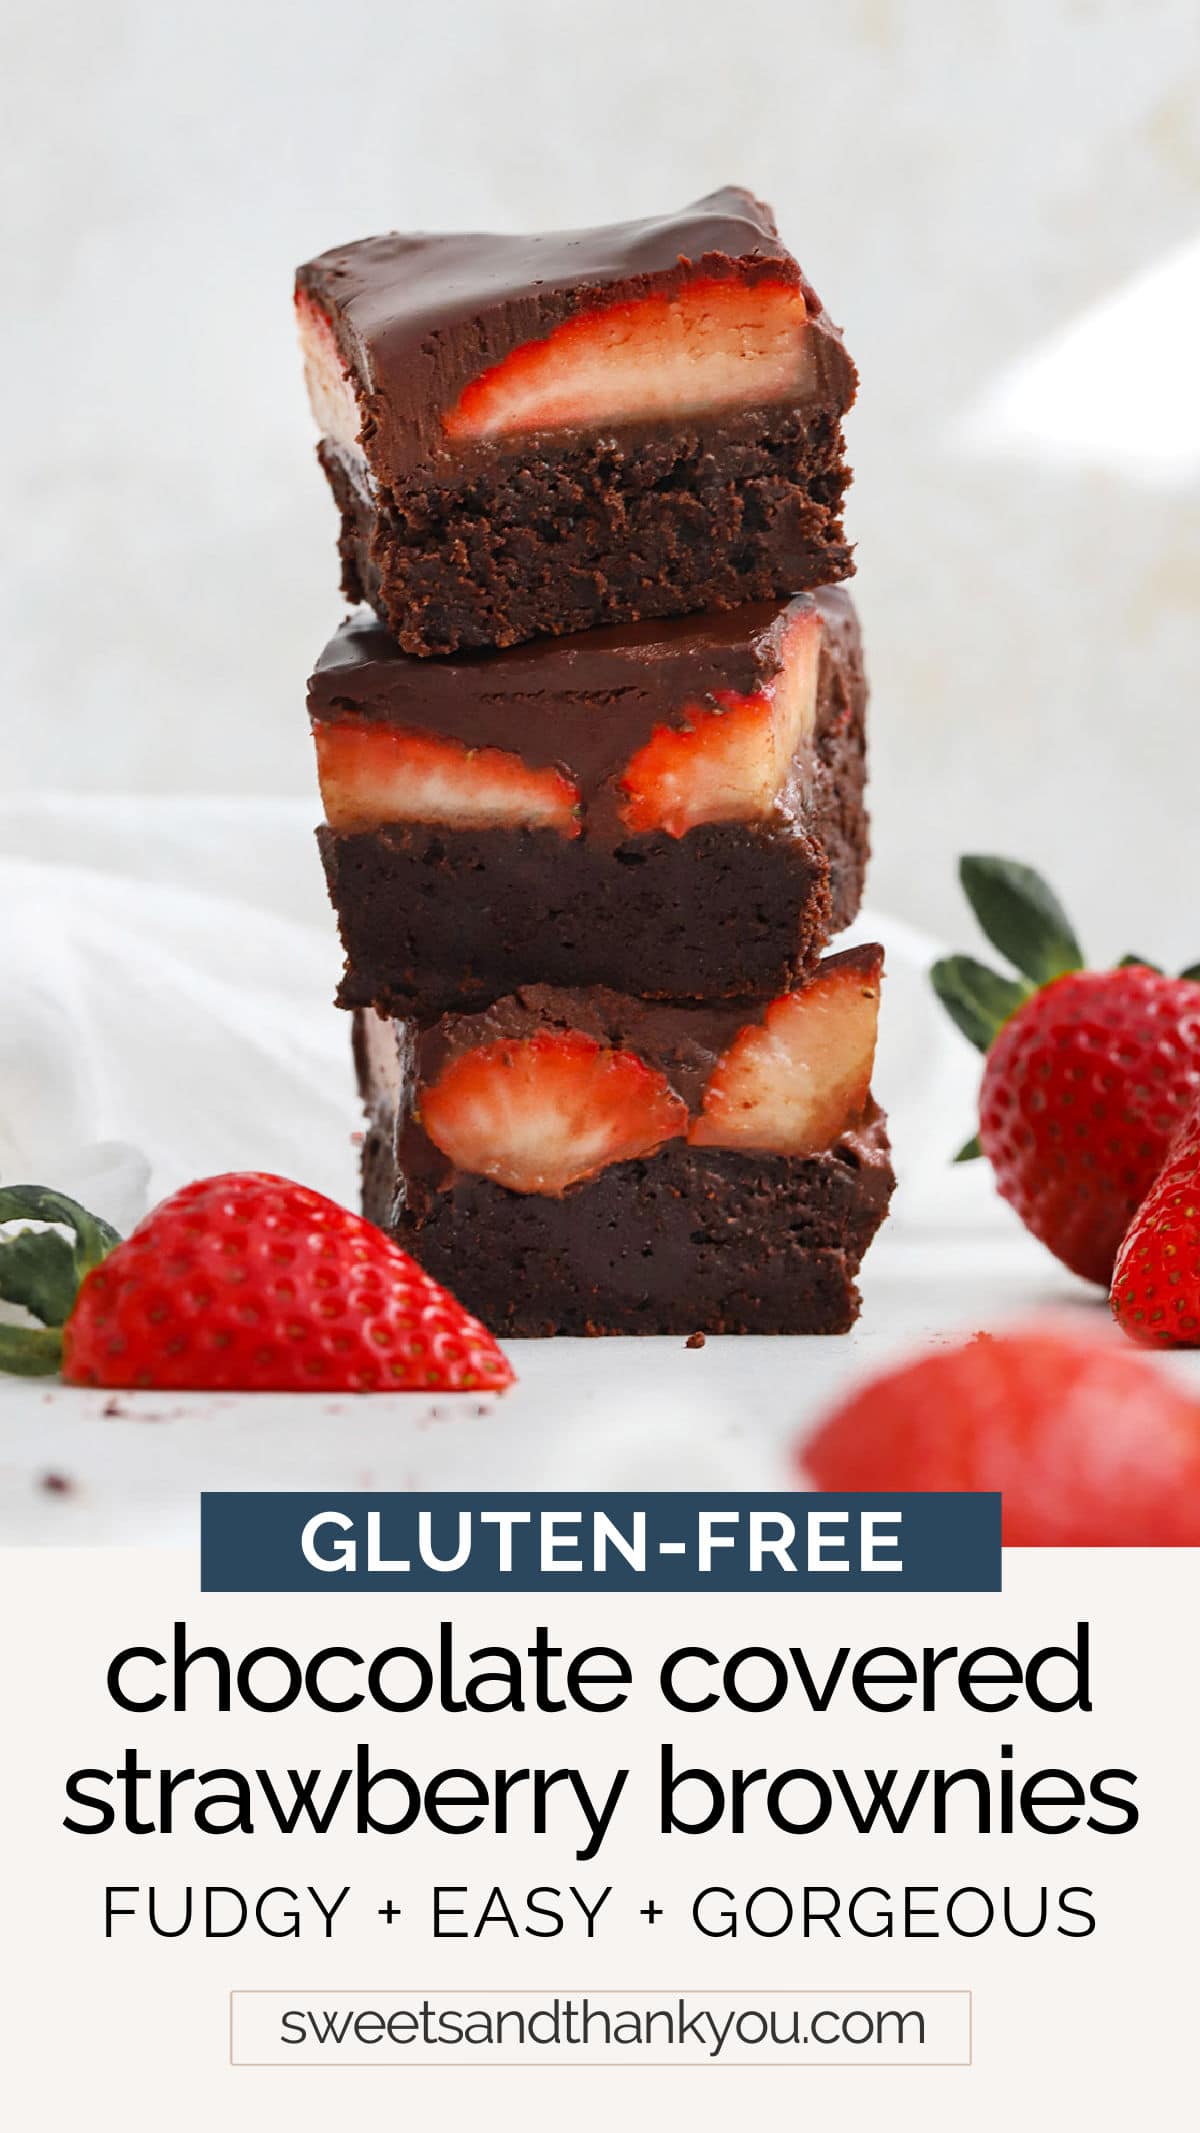 Gluten-Free Chocolate Covered Strawberry Brownies - Fudgy gluten-free brownies are topped with fresh, ripe strawberries and a glorious chocolate ganache that'll make your heart sing! // gluten-free strawberry brownies // gluten-free valentine's brownies // gluten-free dessert // valentines dessert // strawberry brownie recipe // Sweets And Thank You brownie recipe